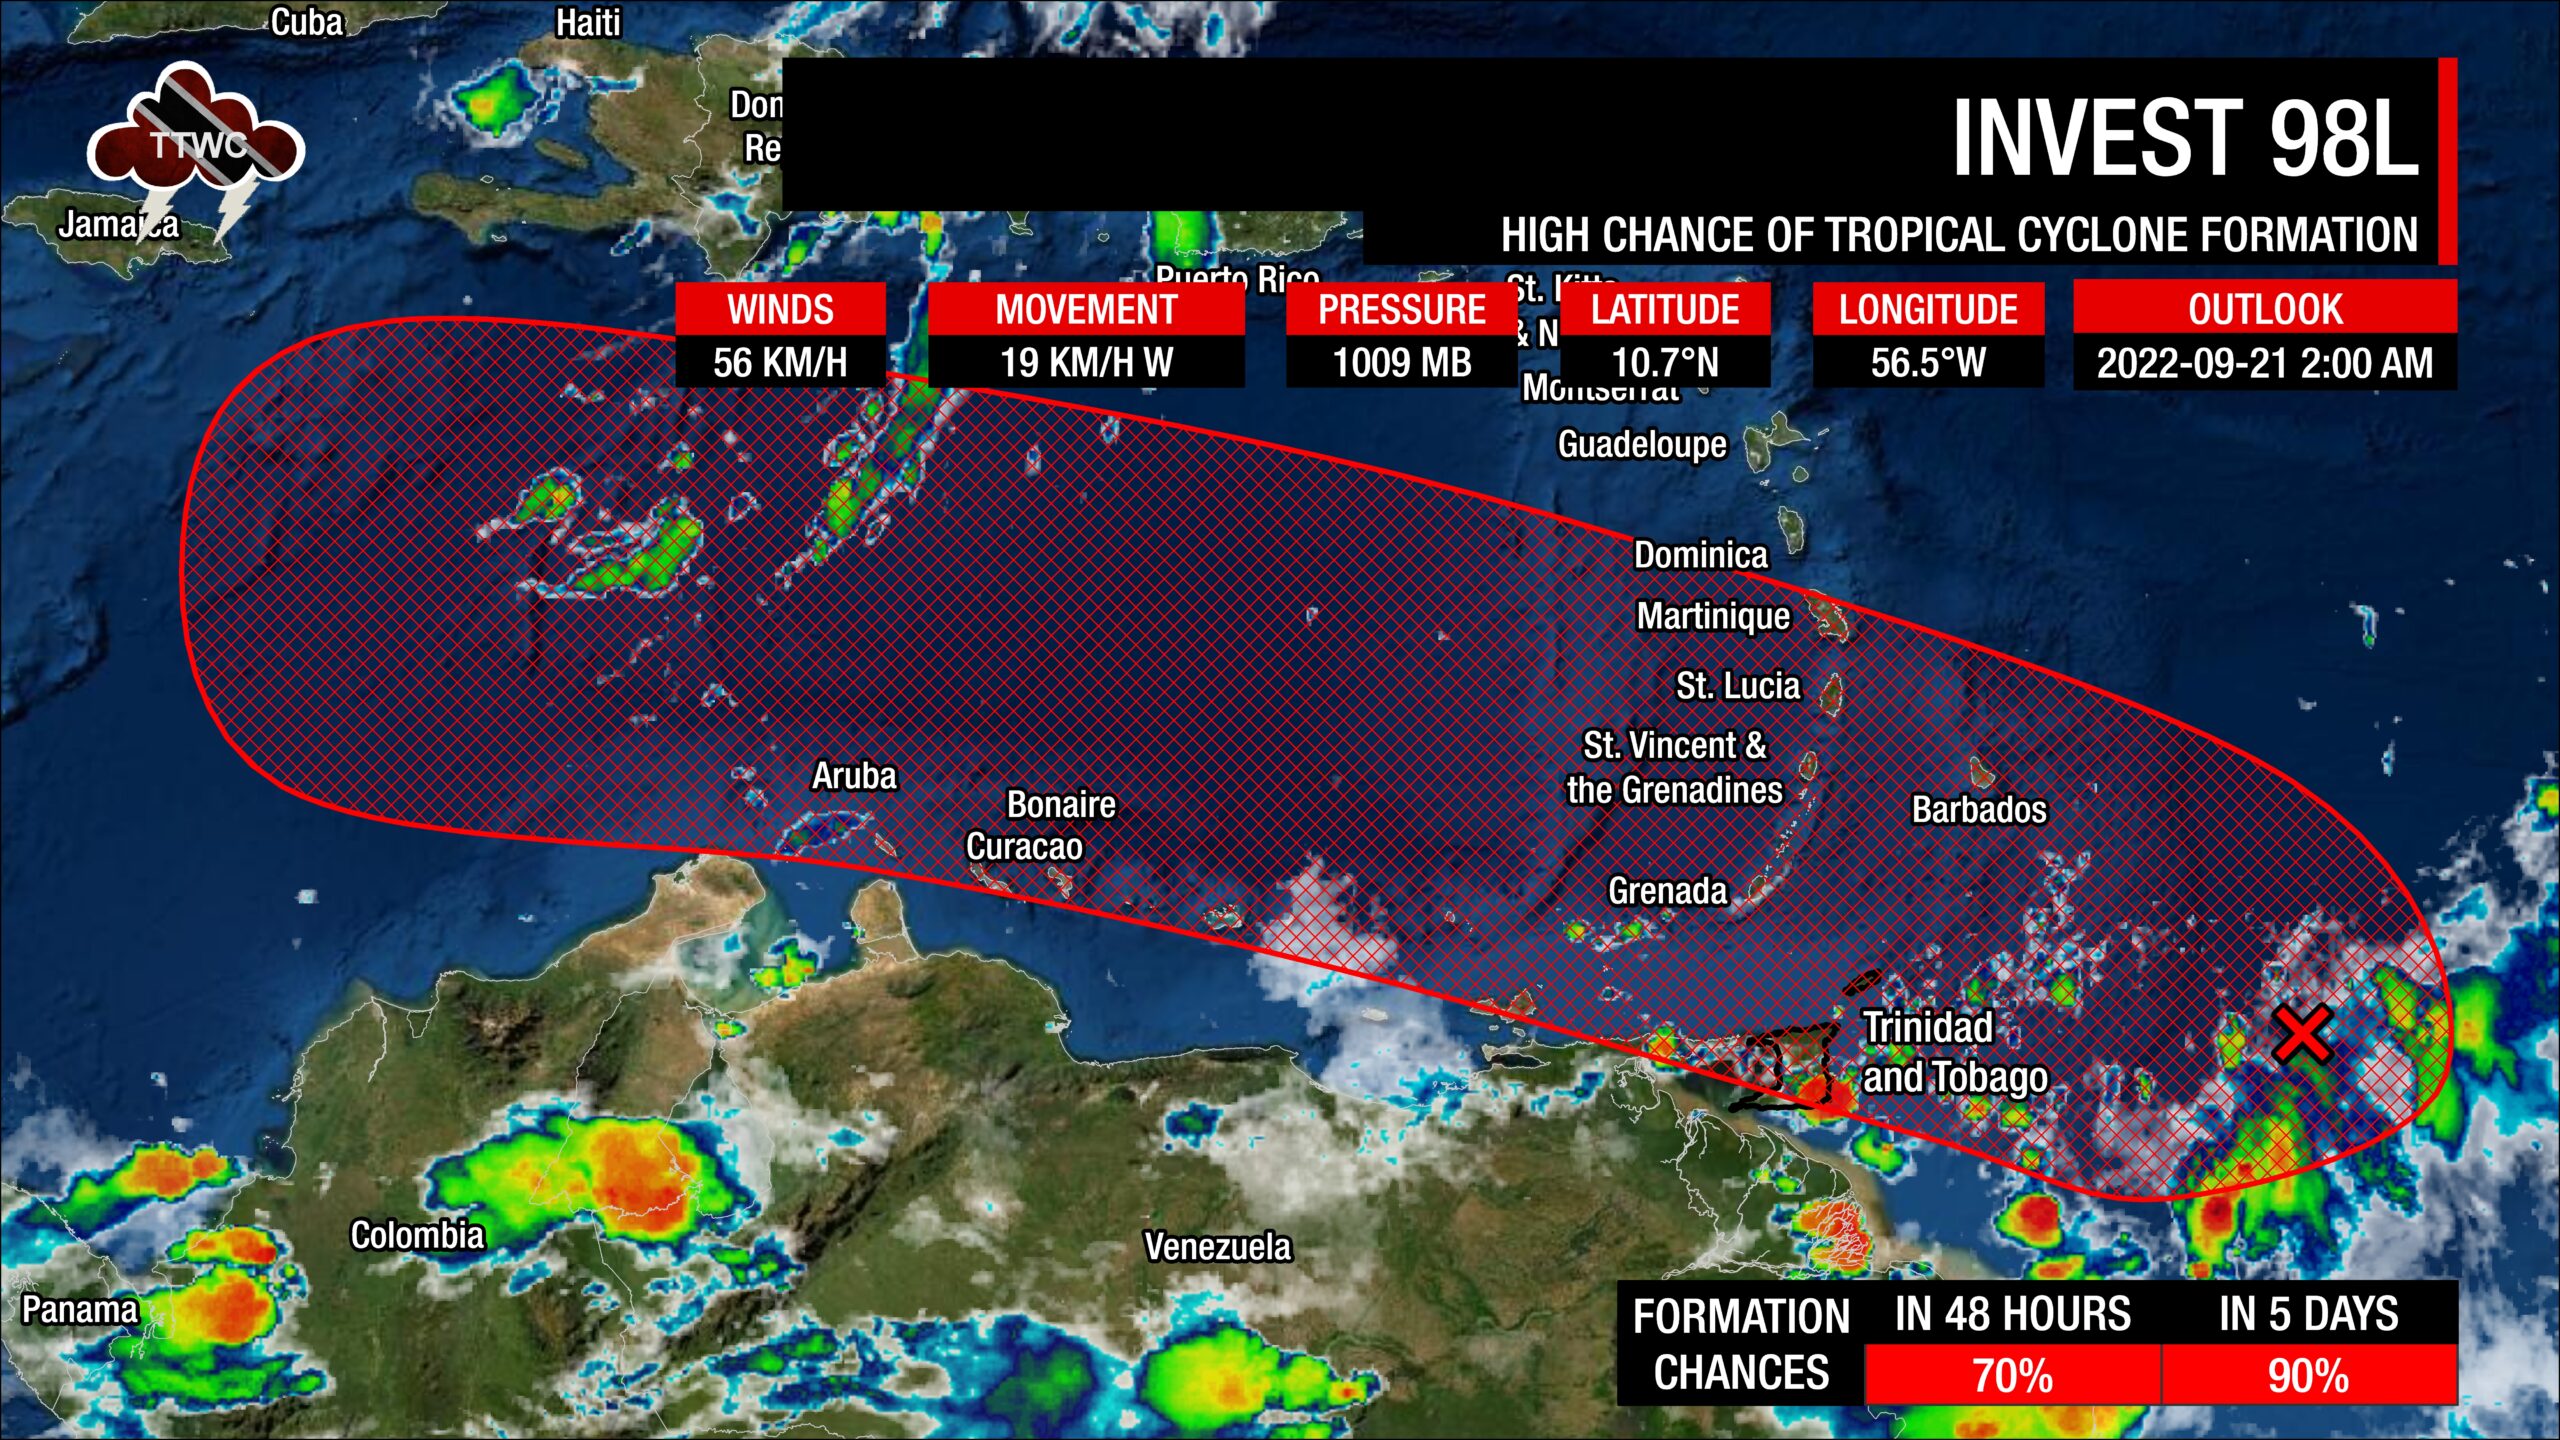 Invest 98L To Directly Impact T&T Through Thursday Trinidad and